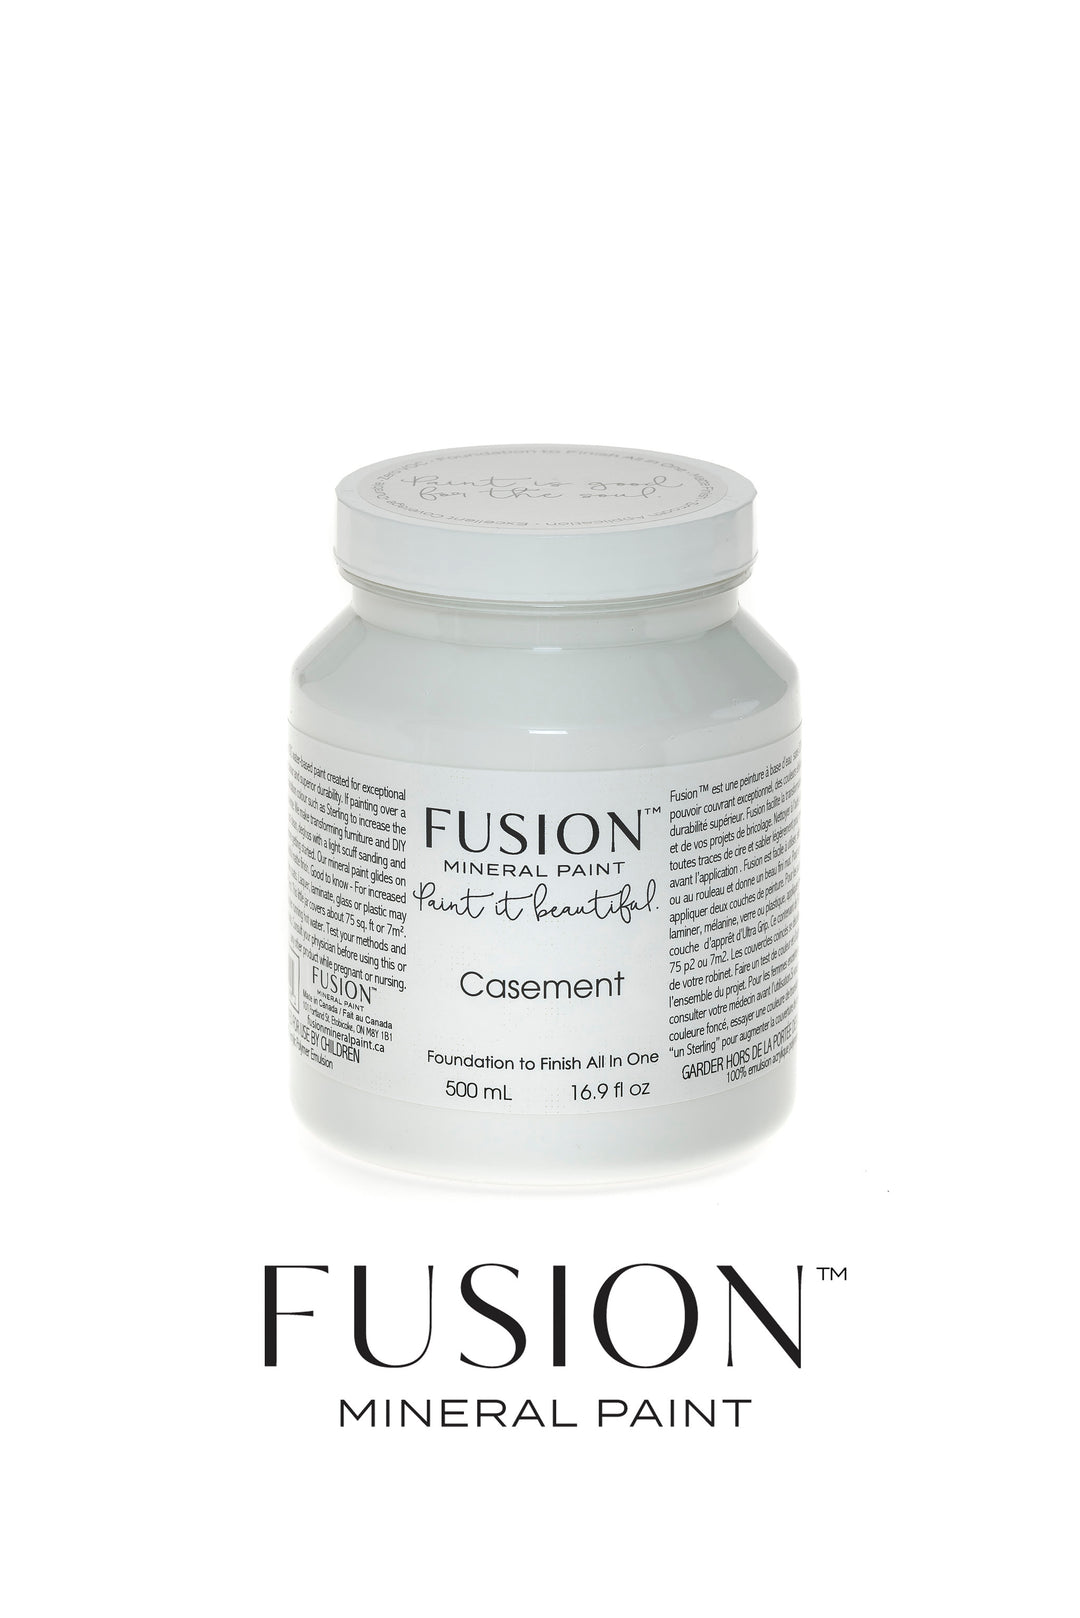 Fusion Mineral Paint - CASEMENT (Pint) - Acosta's Home